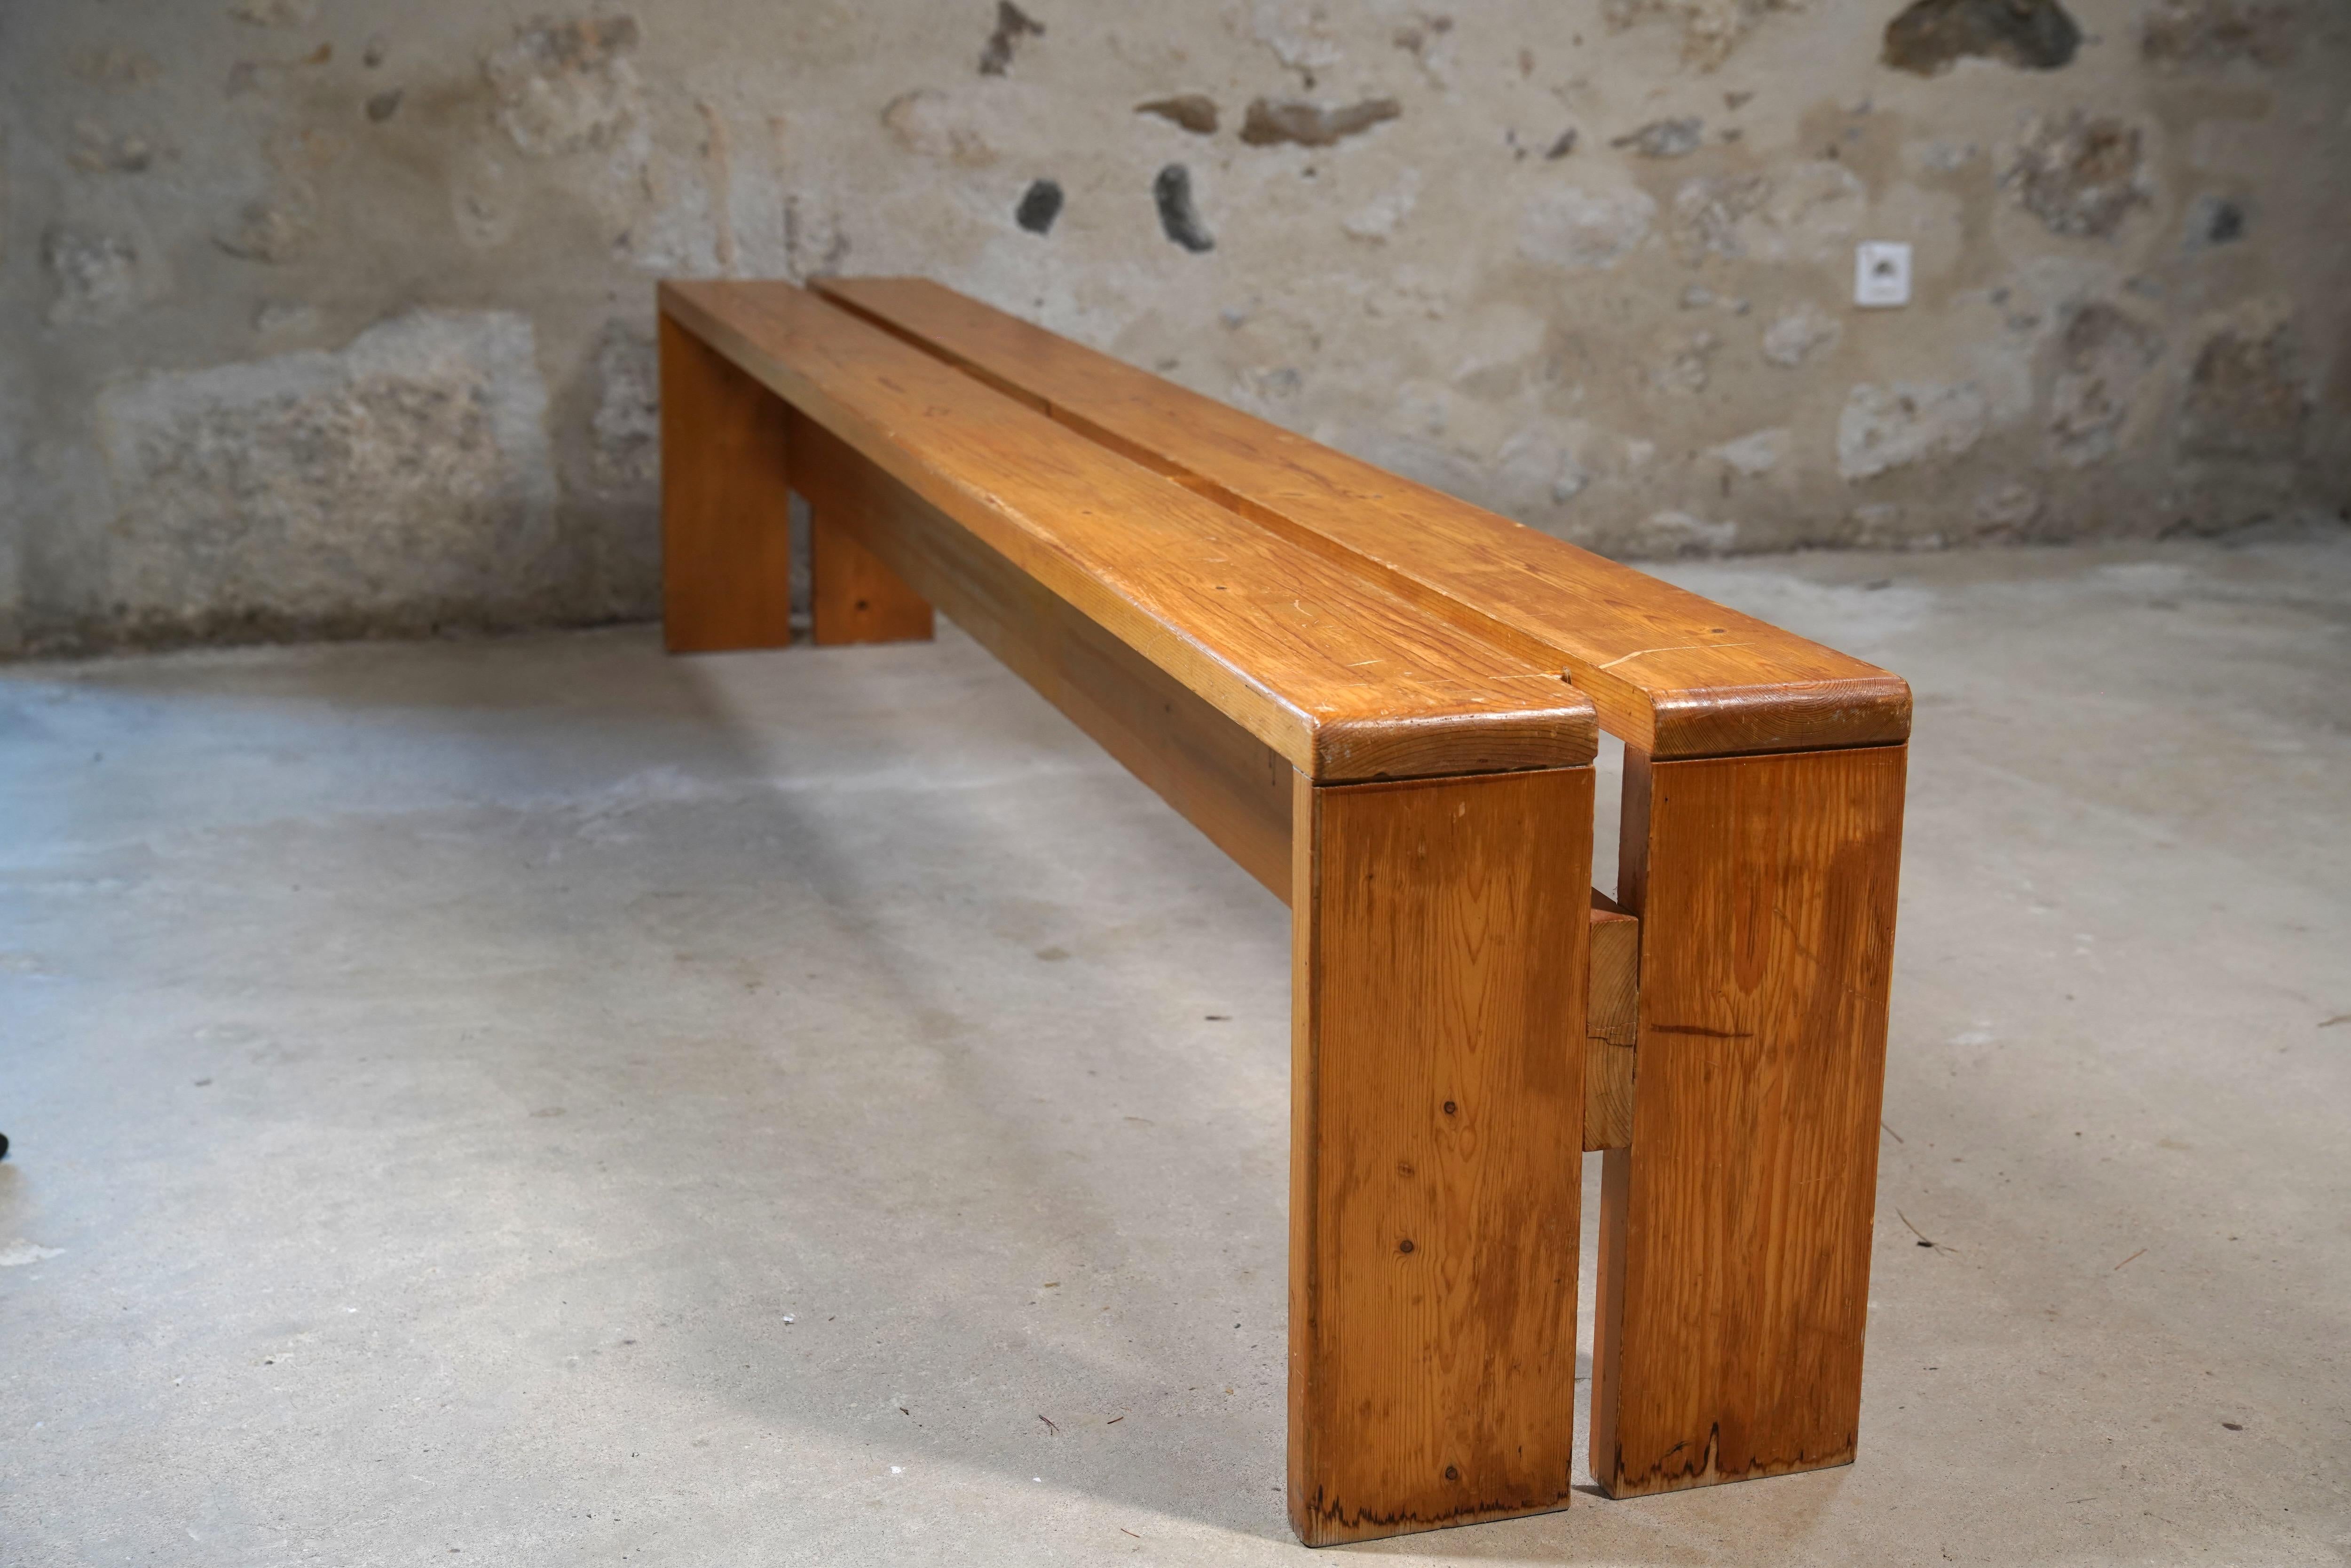 Mid-Century Modern Charlotte Perriand Long Bench from Les Arcs, France circa 1968